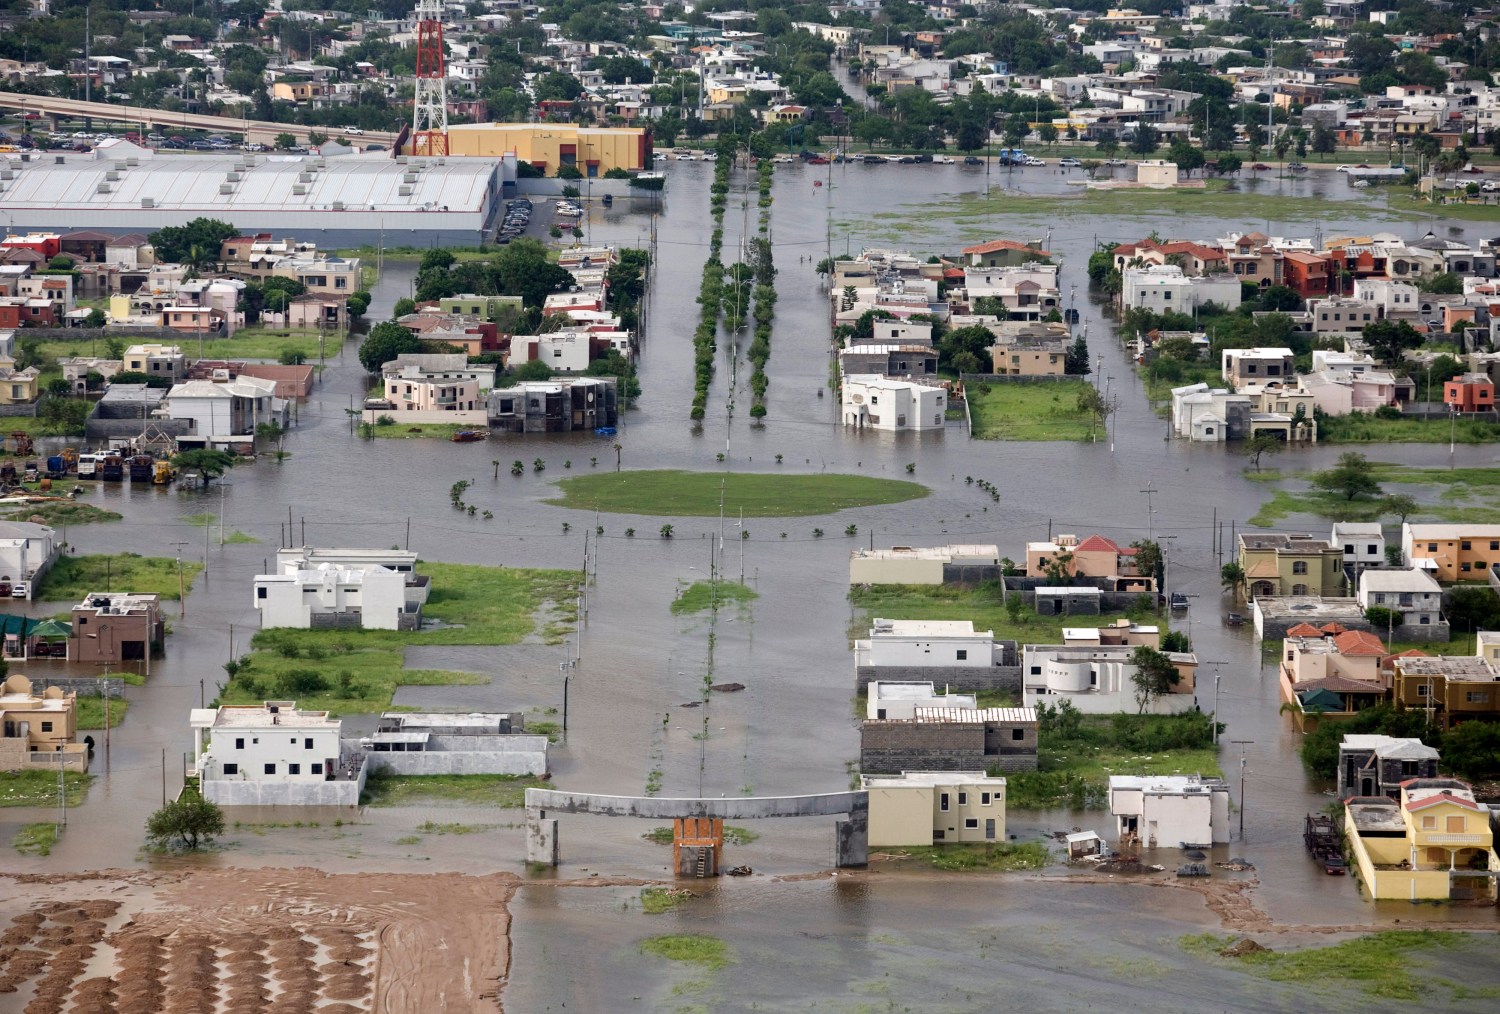 An aerial view of a flooded sector of the border city of Matamoros after being hit by Hurricane Dolly July 24, 2008. U.S. forecasters downgraded Dolly to a tropical depression on Thursday as it dissipated over South Texas. REUTERS/Tomas Bravo (MEXICO)